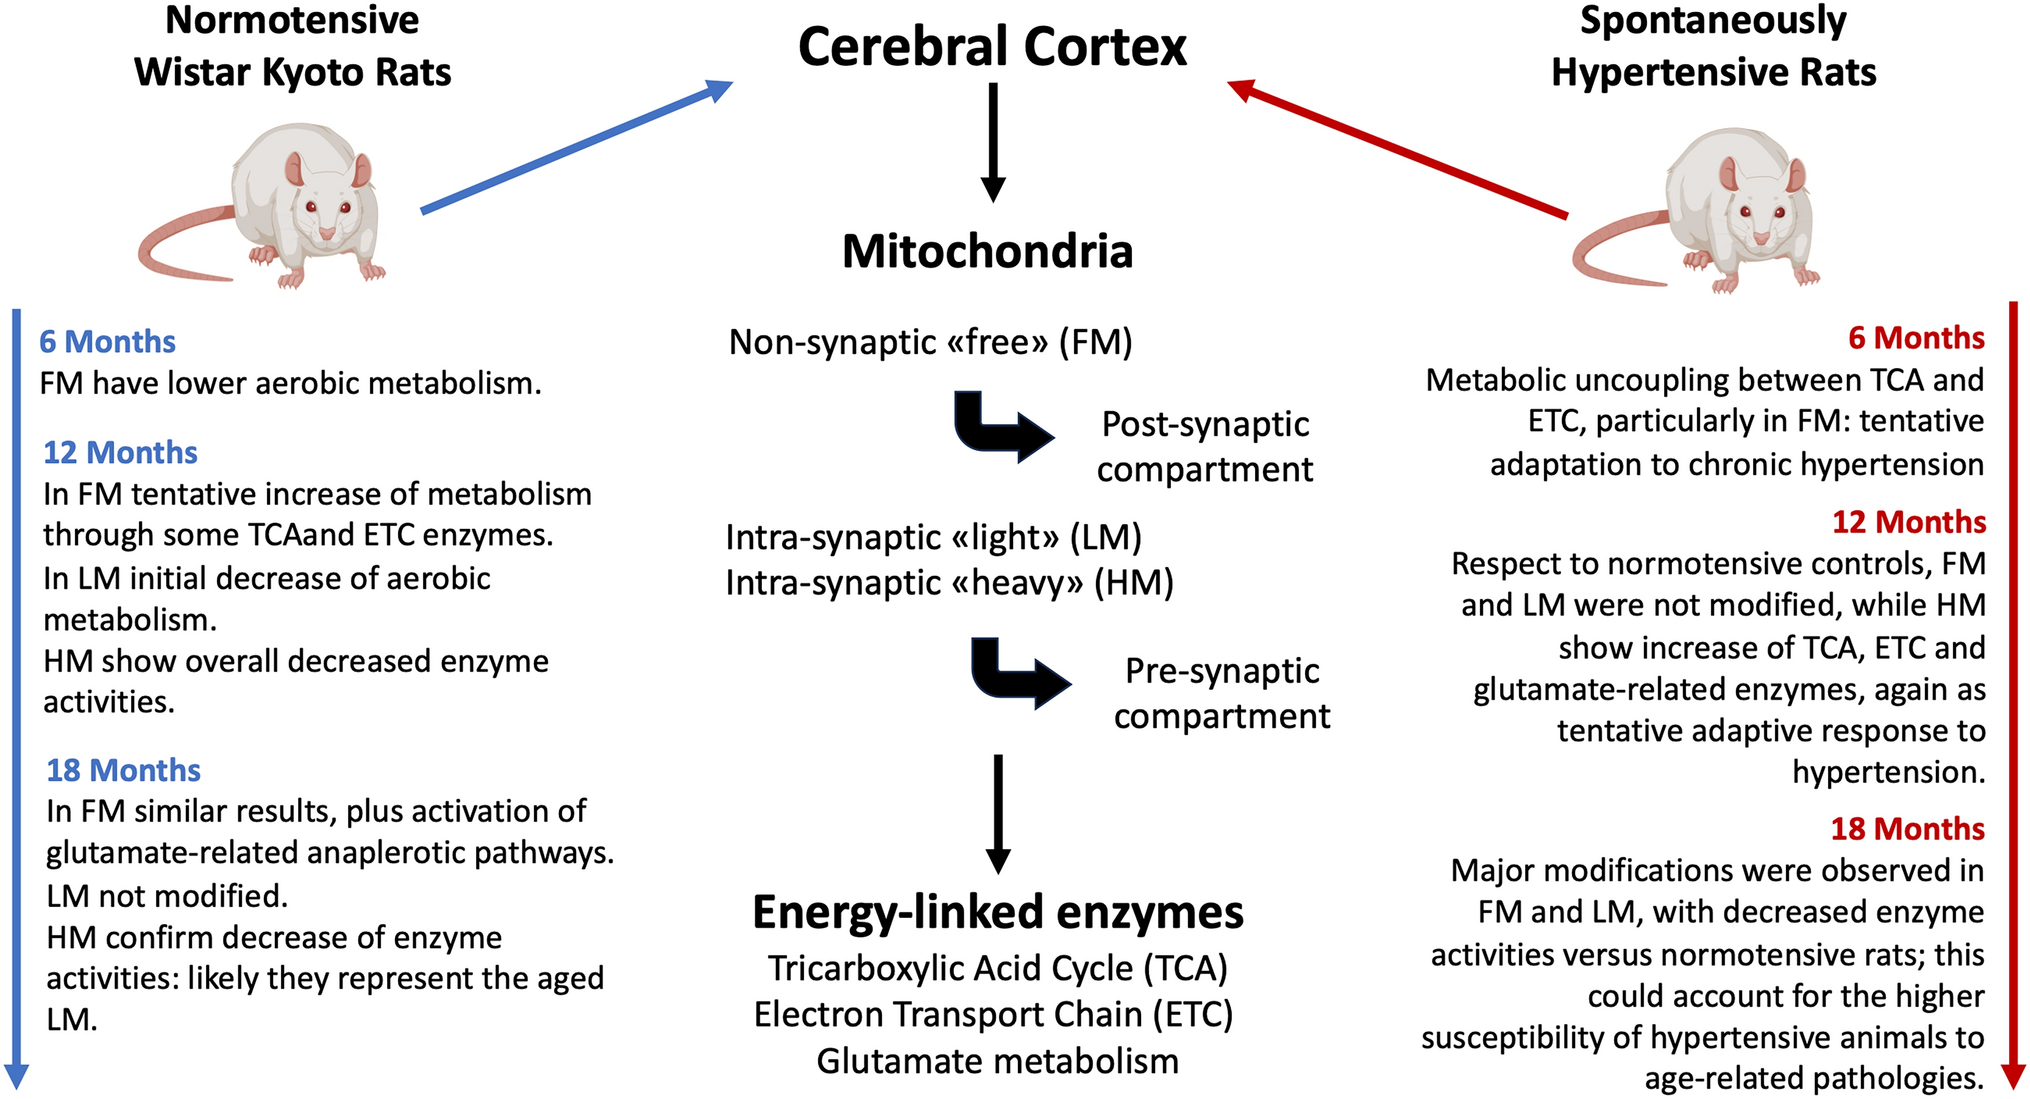 Effects of Chronic Hypertension on the Energy Metabolism of Cerebral Cortex Mitochondria in Normotensive and in Spontaneously Hypertensive Rats During Aging